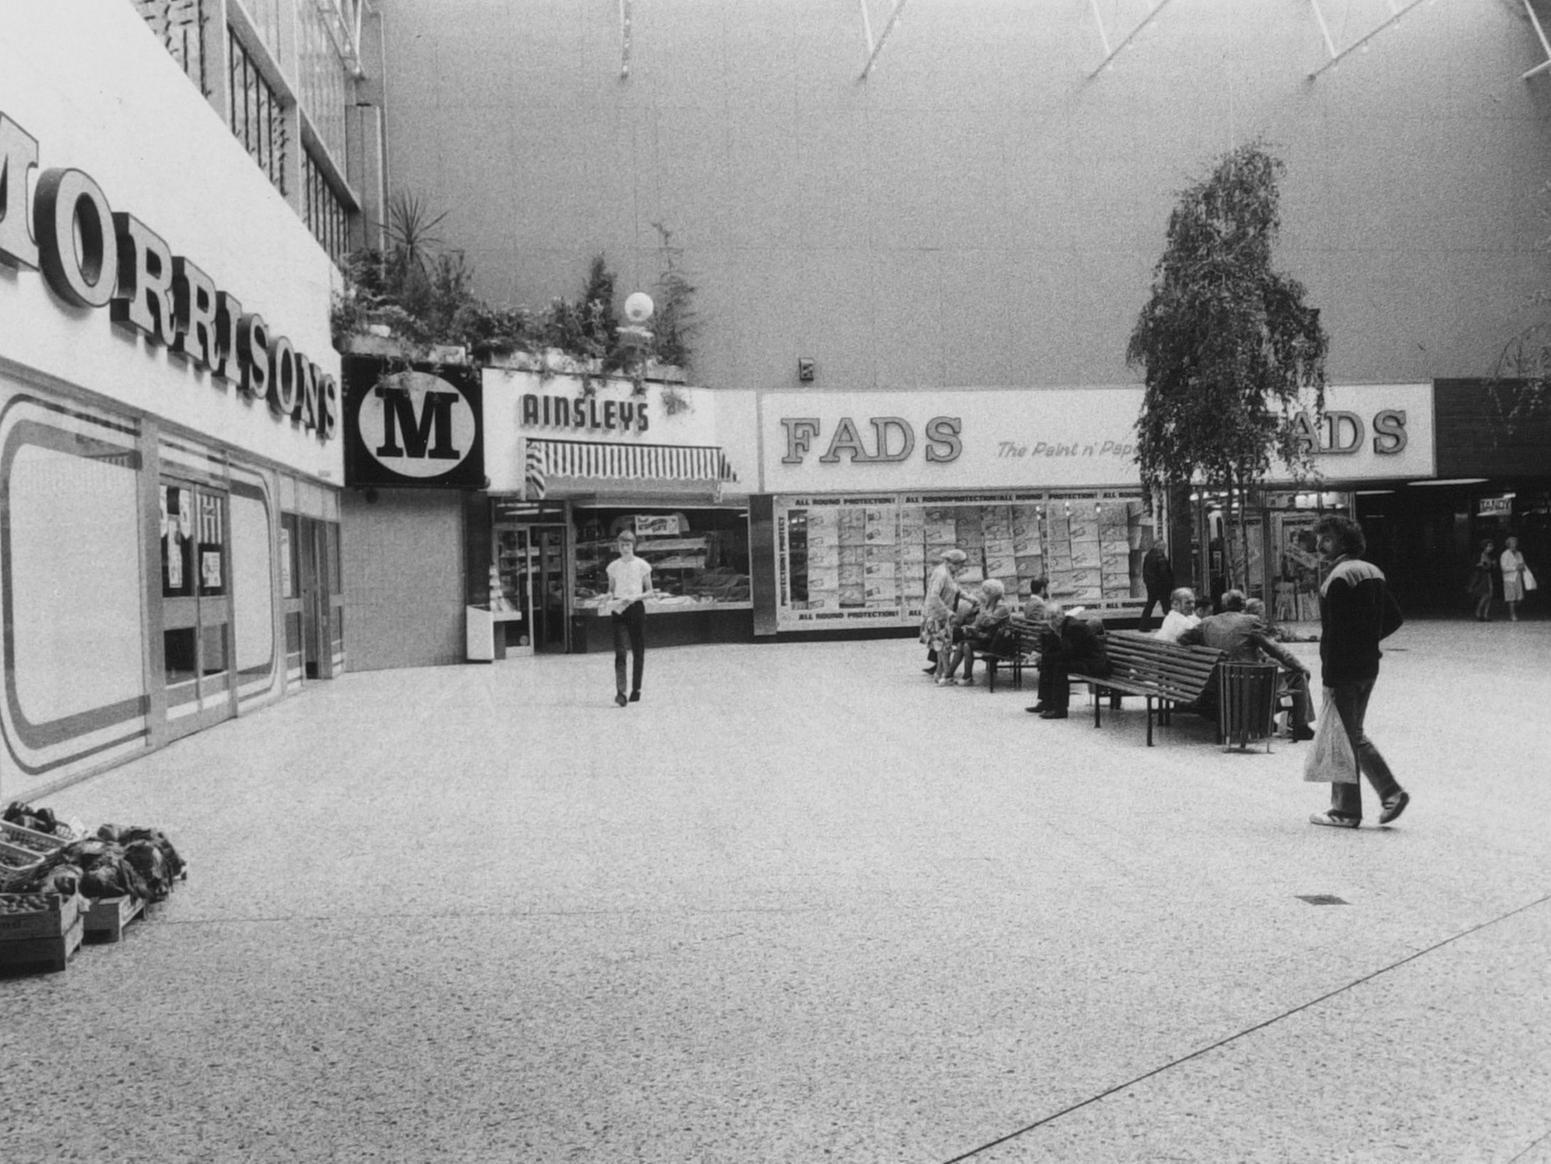 The Morrisons store at The Merrion Centre. Do you remember shopping here back in the day?